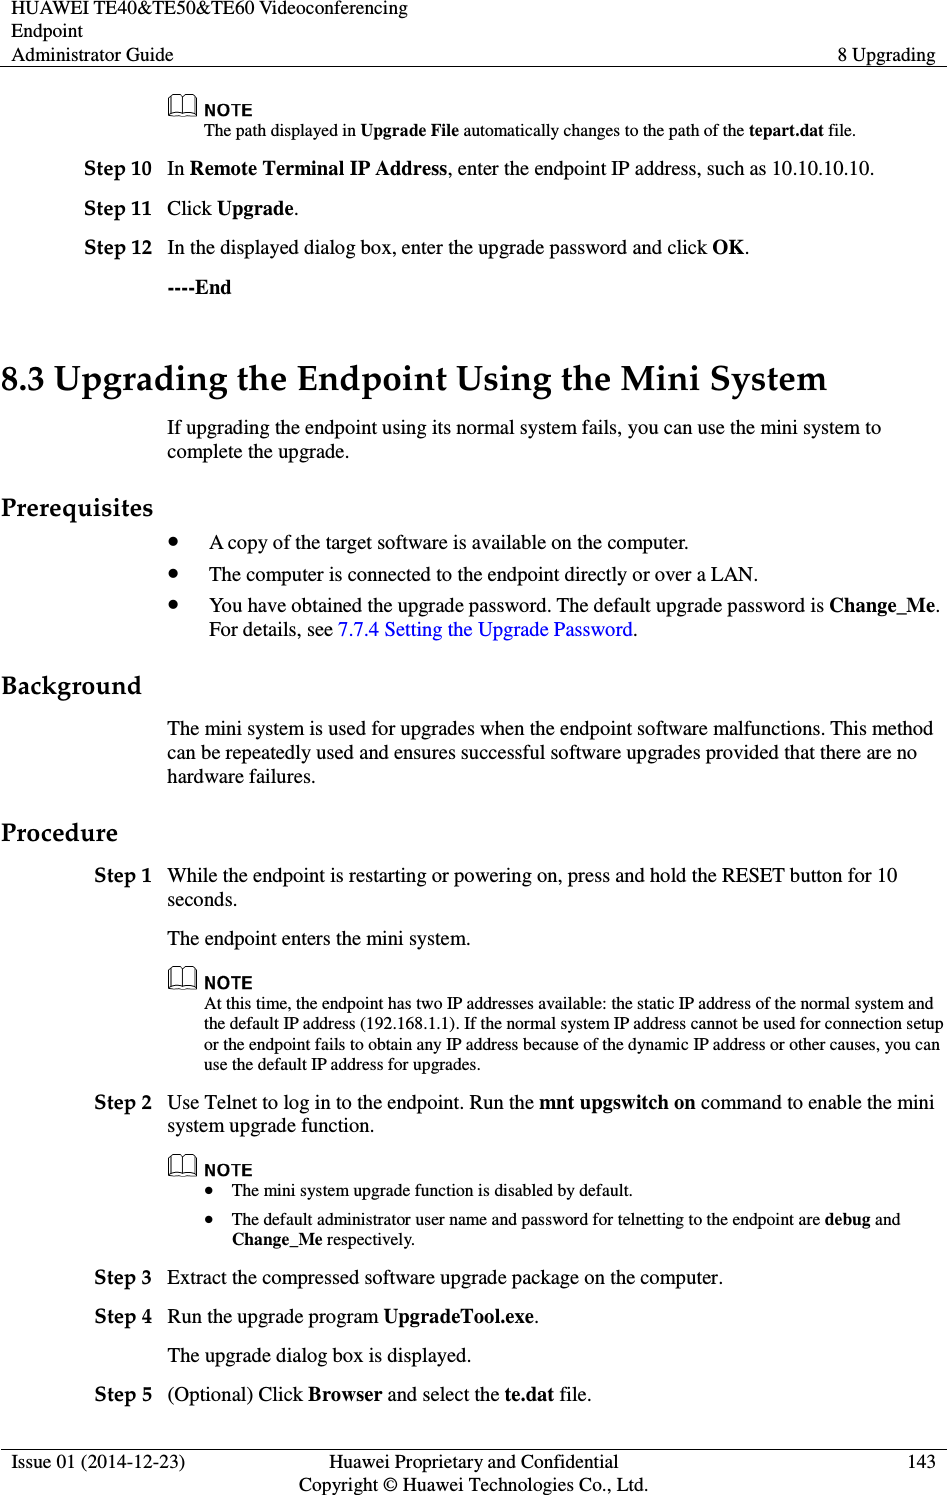 HUAWEI TE40&amp;TE50&amp;TE60 Videoconferencing Endpoint Administrator Guide  8 Upgrading  Issue 01 (2014-12-23)  Huawei Proprietary and Confidential                                     Copyright © Huawei Technologies Co., Ltd. 143   The path displayed in Upgrade File automatically changes to the path of the tepart.dat file. Step 10 In Remote Terminal IP Address, enter the endpoint IP address, such as 10.10.10.10. Step 11 Click Upgrade. Step 12 In the displayed dialog box, enter the upgrade password and click OK. ----End 8.3 Upgrading the Endpoint Using the Mini System If upgrading the endpoint using its normal system fails, you can use the mini system to complete the upgrade. Prerequisites  A copy of the target software is available on the computer.  The computer is connected to the endpoint directly or over a LAN.  You have obtained the upgrade password. The default upgrade password is Change_Me. For details, see 7.7.4 Setting the Upgrade Password. Background The mini system is used for upgrades when the endpoint software malfunctions. This method can be repeatedly used and ensures successful software upgrades provided that there are no hardware failures. Procedure Step 1 While the endpoint is restarting or powering on, press and hold the RESET button for 10 seconds. The endpoint enters the mini system.  At this time, the endpoint has two IP addresses available: the static IP address of the normal system and the default IP address (192.168.1.1). If the normal system IP address cannot be used for connection setup or the endpoint fails to obtain any IP address because of the dynamic IP address or other causes, you can use the default IP address for upgrades. Step 2 Use Telnet to log in to the endpoint. Run the mnt upgswitch on command to enable the mini system upgrade function.   The mini system upgrade function is disabled by default.  The default administrator user name and password for telnetting to the endpoint are debug and Change_Me respectively. Step 3 Extract the compressed software upgrade package on the computer. Step 4 Run the upgrade program UpgradeTool.exe. The upgrade dialog box is displayed. Step 5 (Optional) Click Browser and select the te.dat file. 